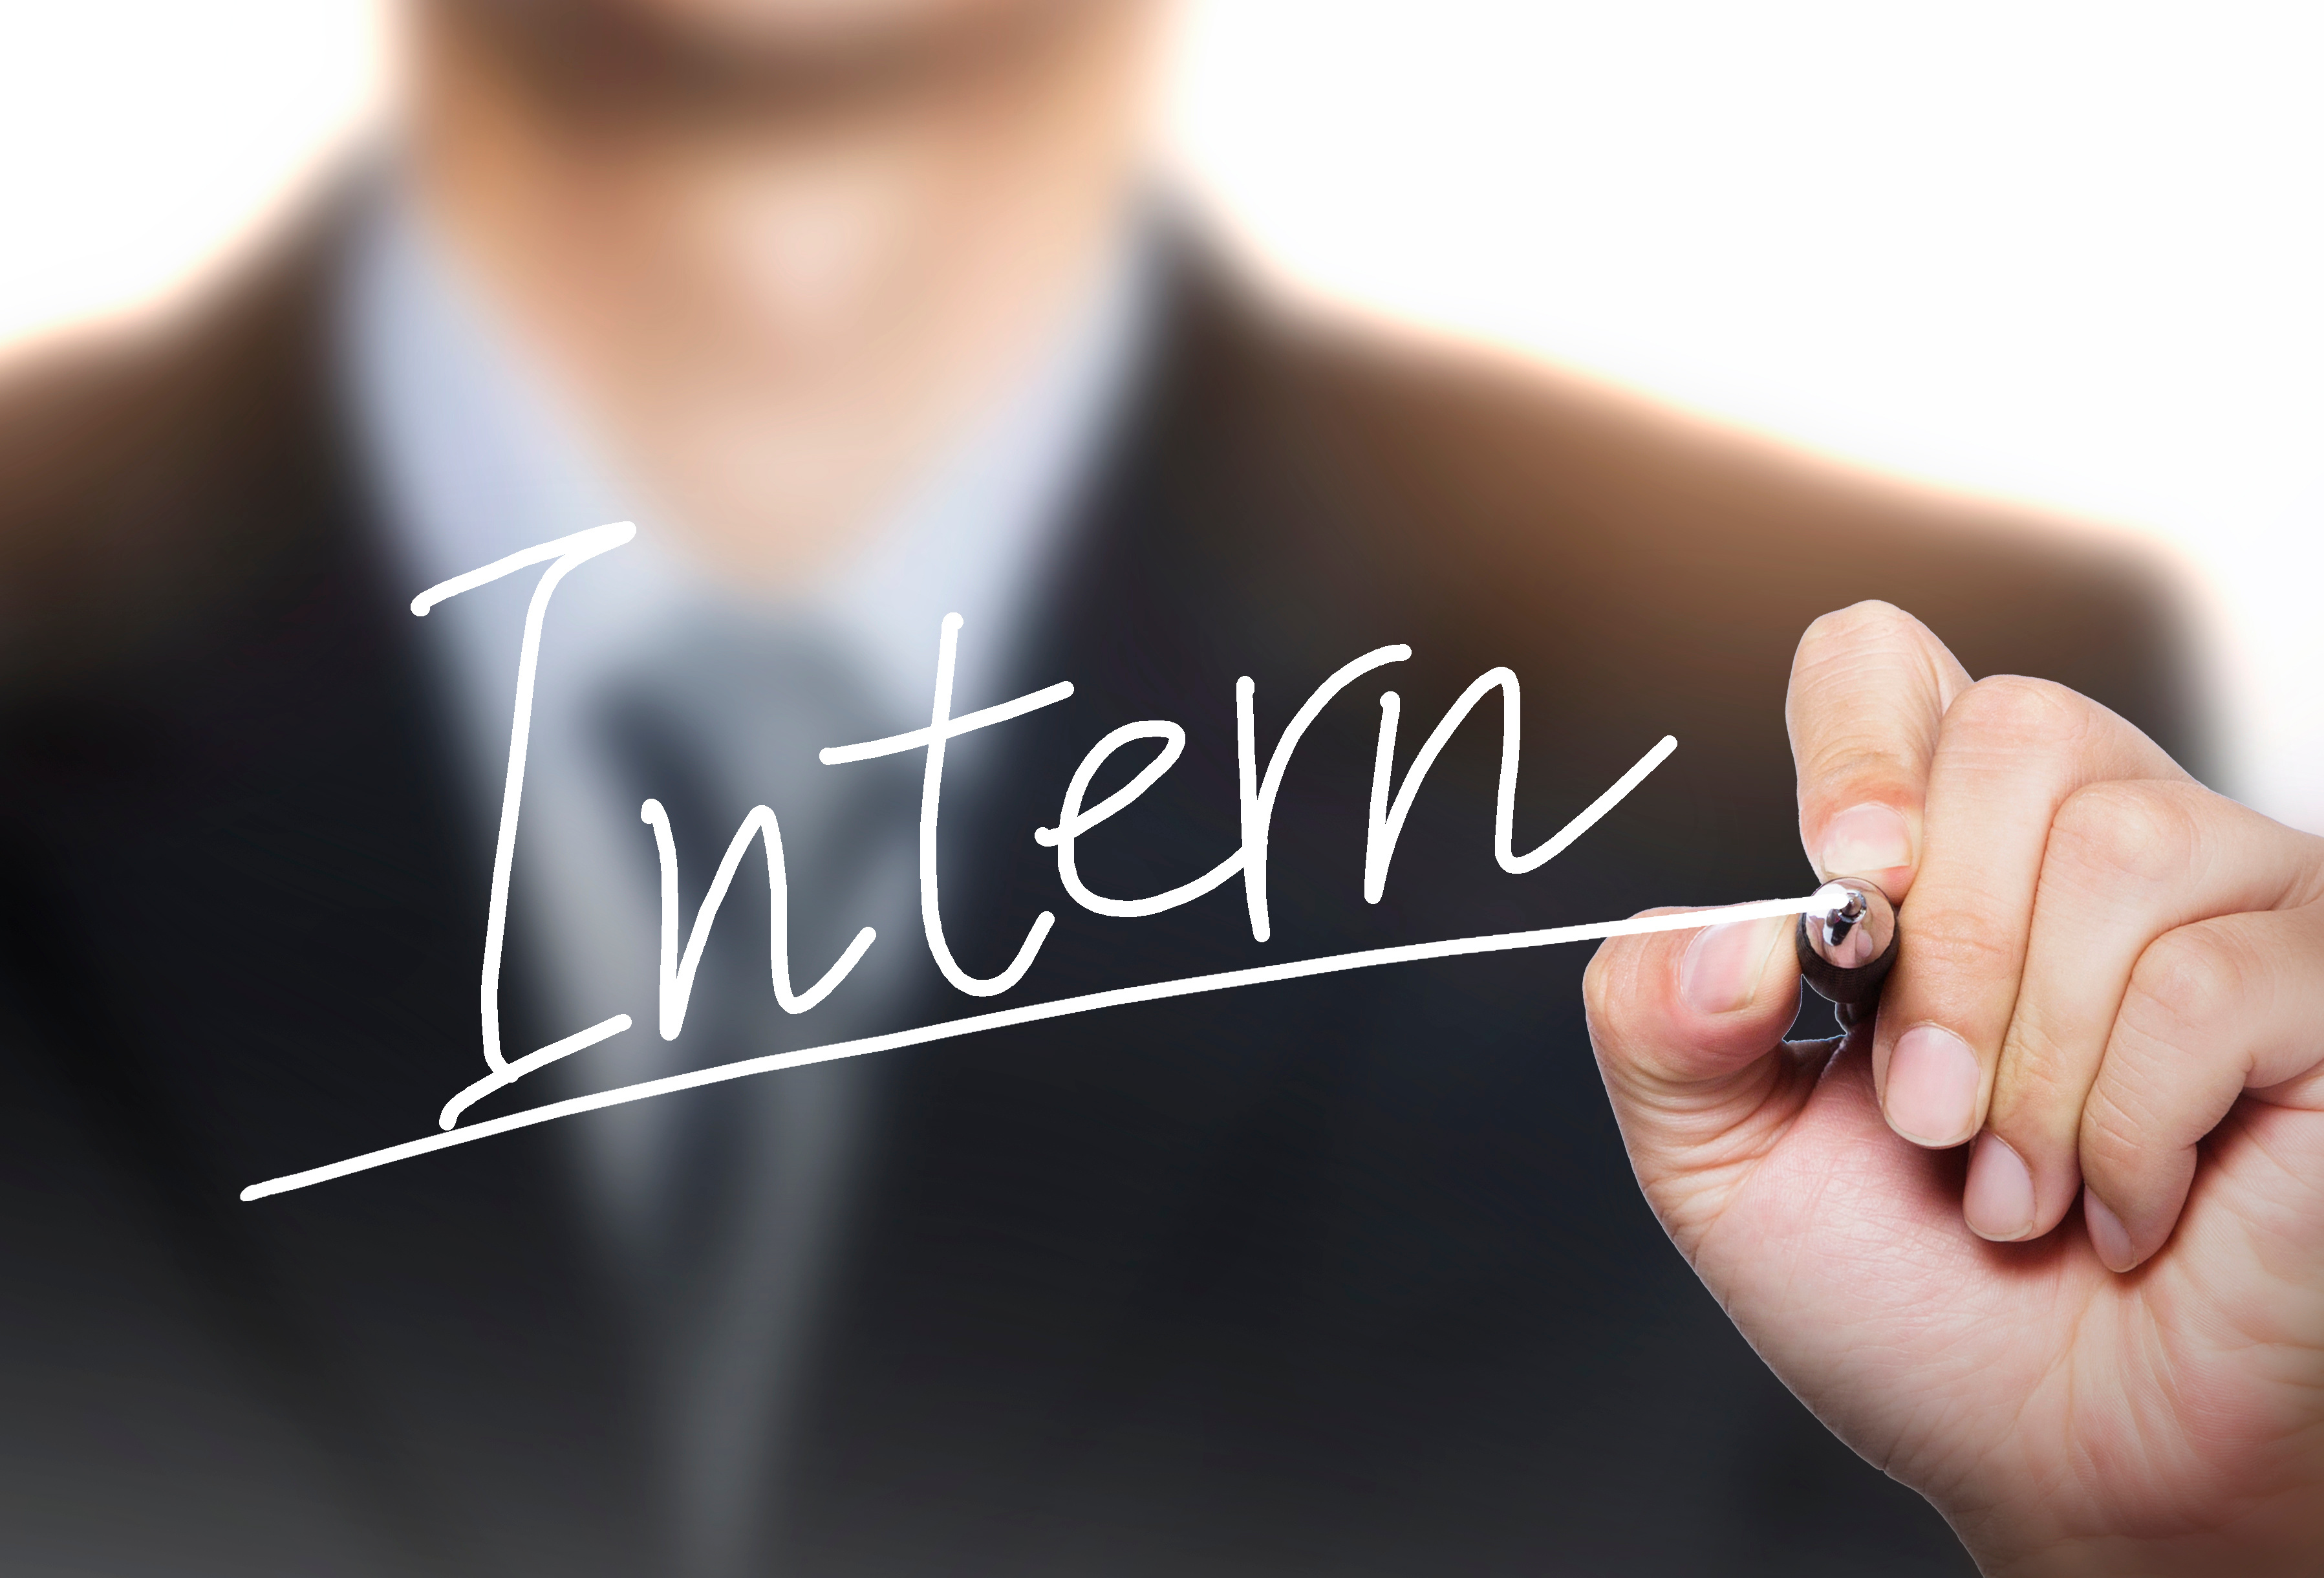 Image 1: Become an Intern